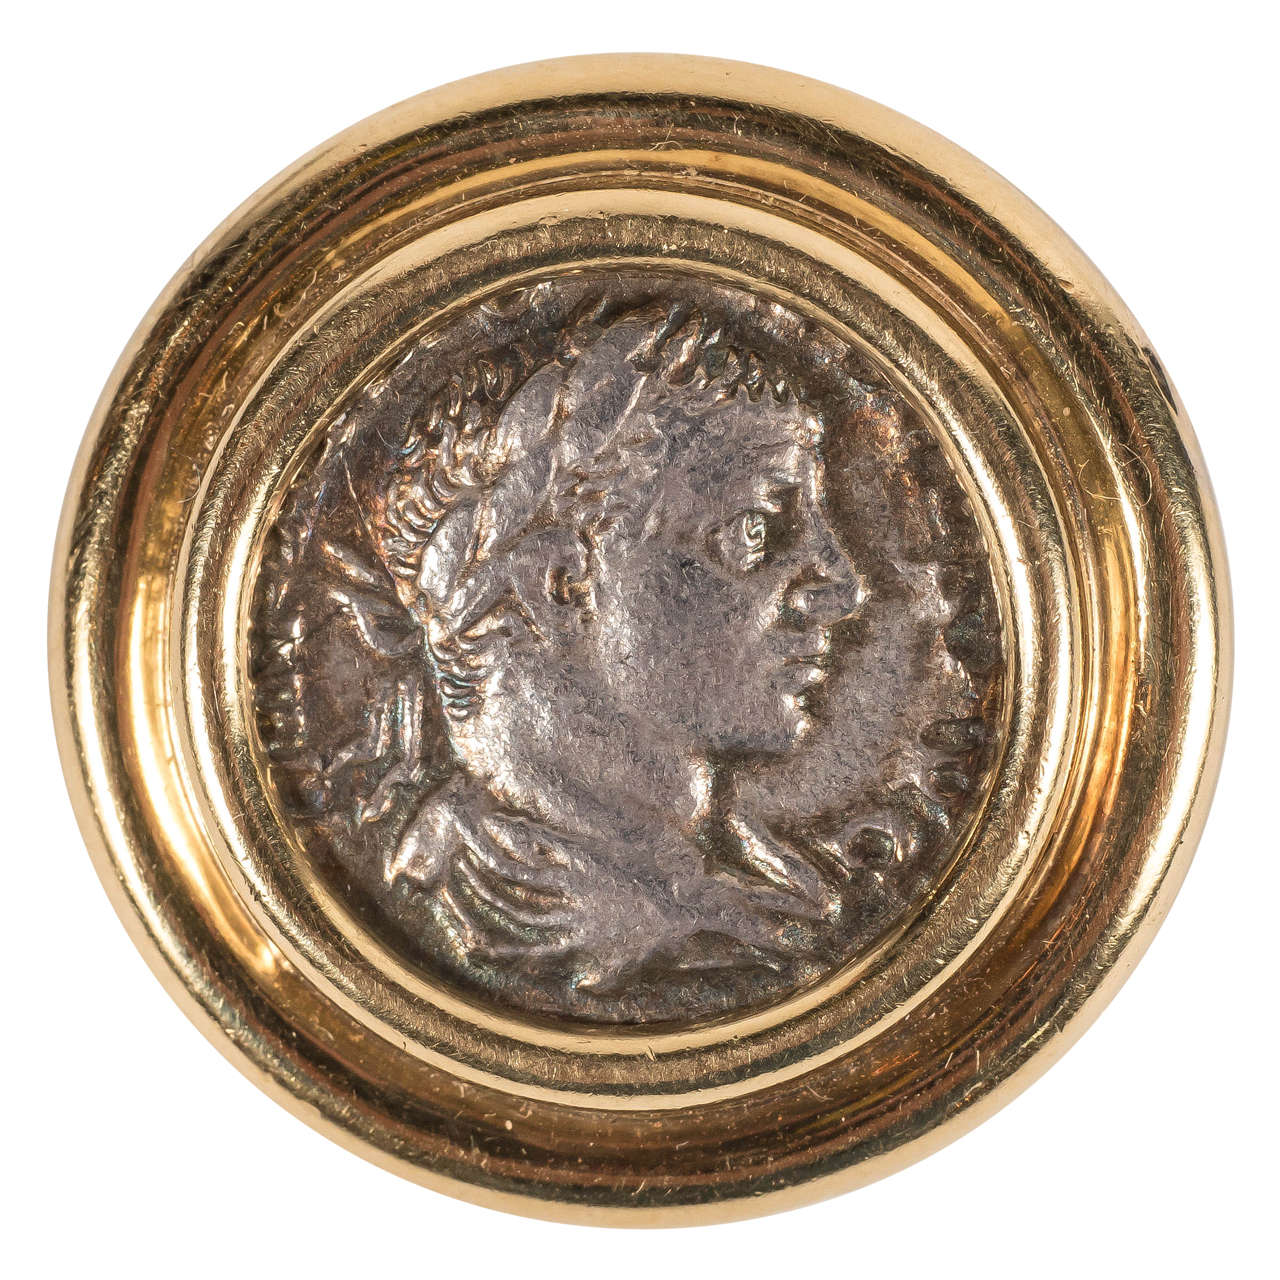 This ancient Roman coin was set in a 18k yellow gold slide in Italy, circa 1970- fusing the ancient and the modern. The piece offers stepped ribbed detailing giving added dimension to the focus of this inset coin. With its beautiful attention to